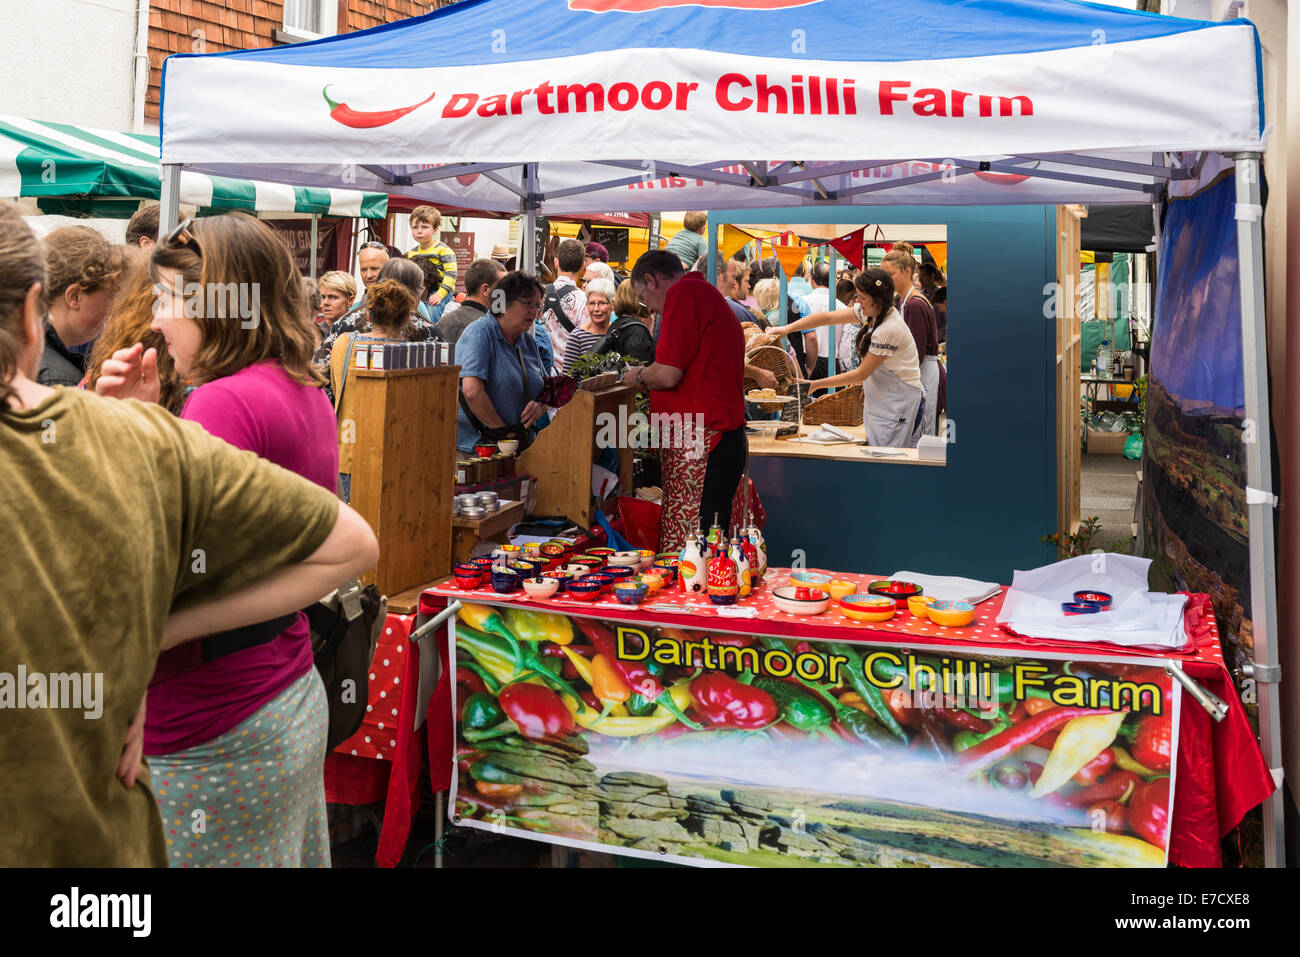 Ashburton Food & Drink Festival market stalls UK. This is from The Dartmoor Chilli Farm stall during a busy time with customers. Stock Photo